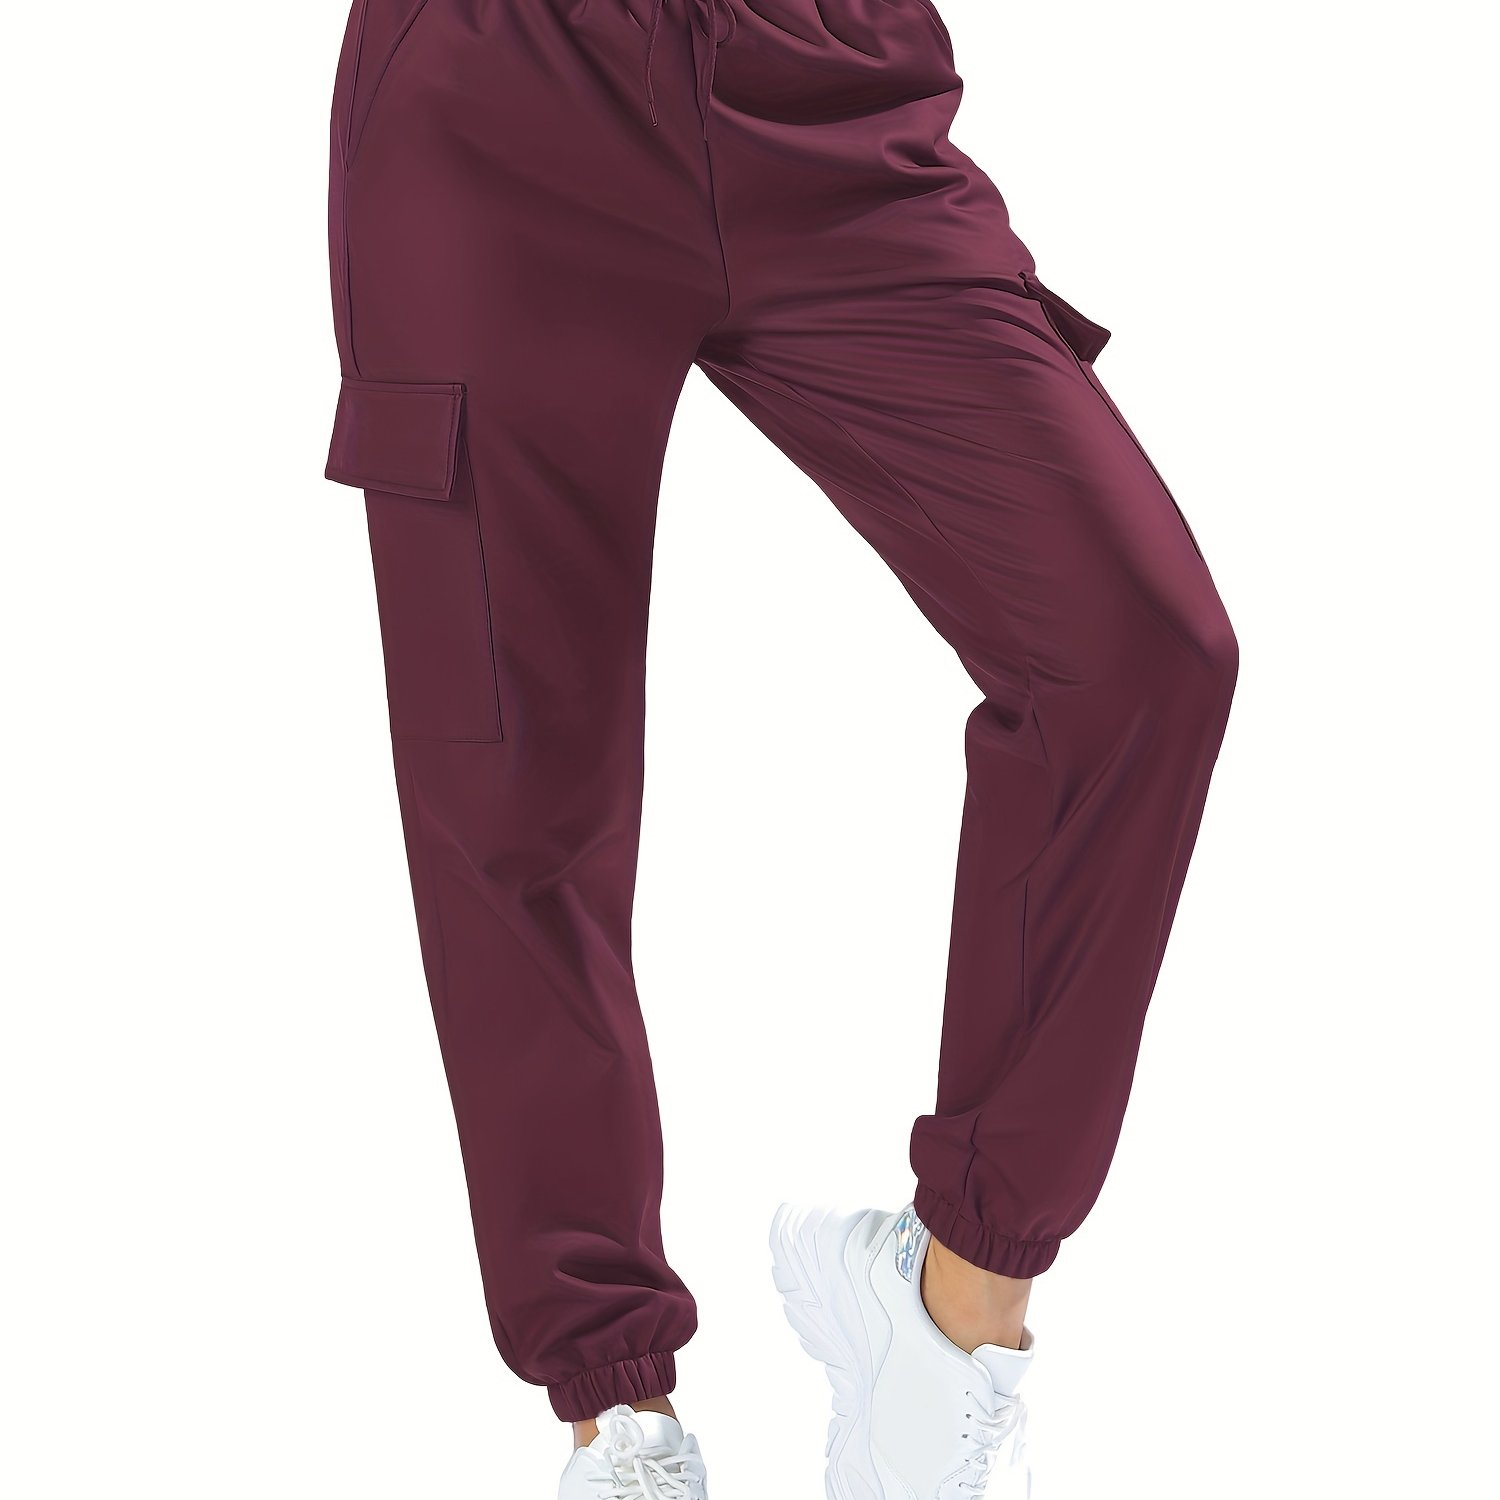 Drawstring Flap Pockets Jogger Pants, Vintage Solid Faux Leather Cargo Pants,  Women's Clothing, Check Out Today's Deals Now